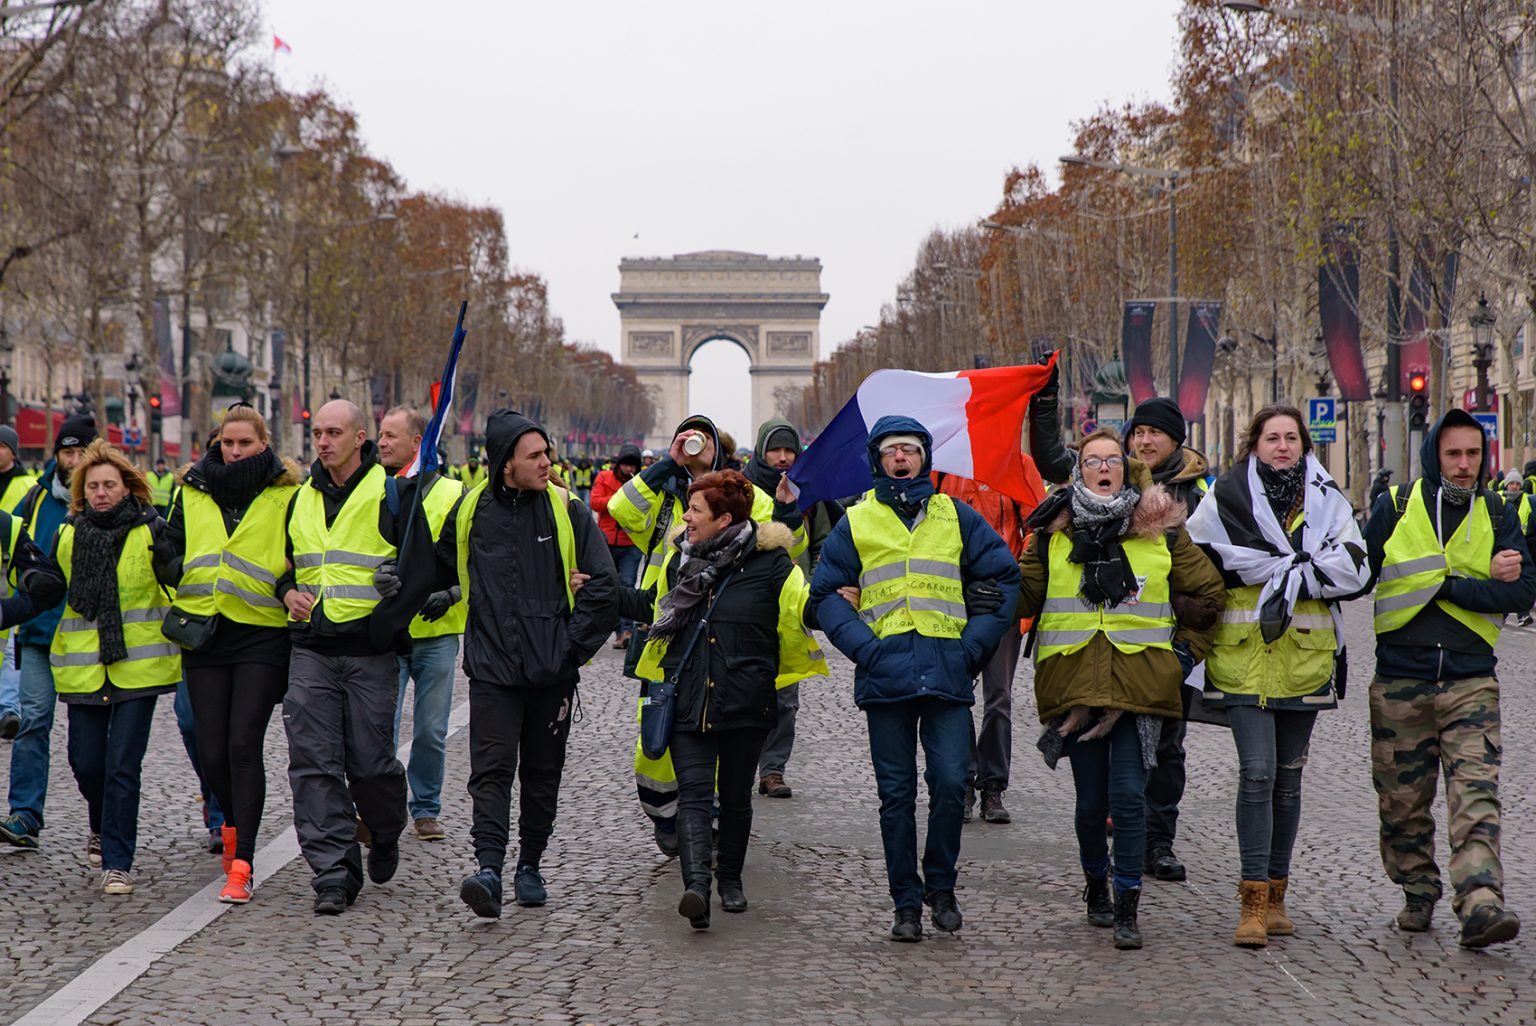 Yellow Vests demonstration (Gilets Jaunes) protesters against fuel tax, government, and French President Macron at Champs-Élysées and Arc de Triomphe